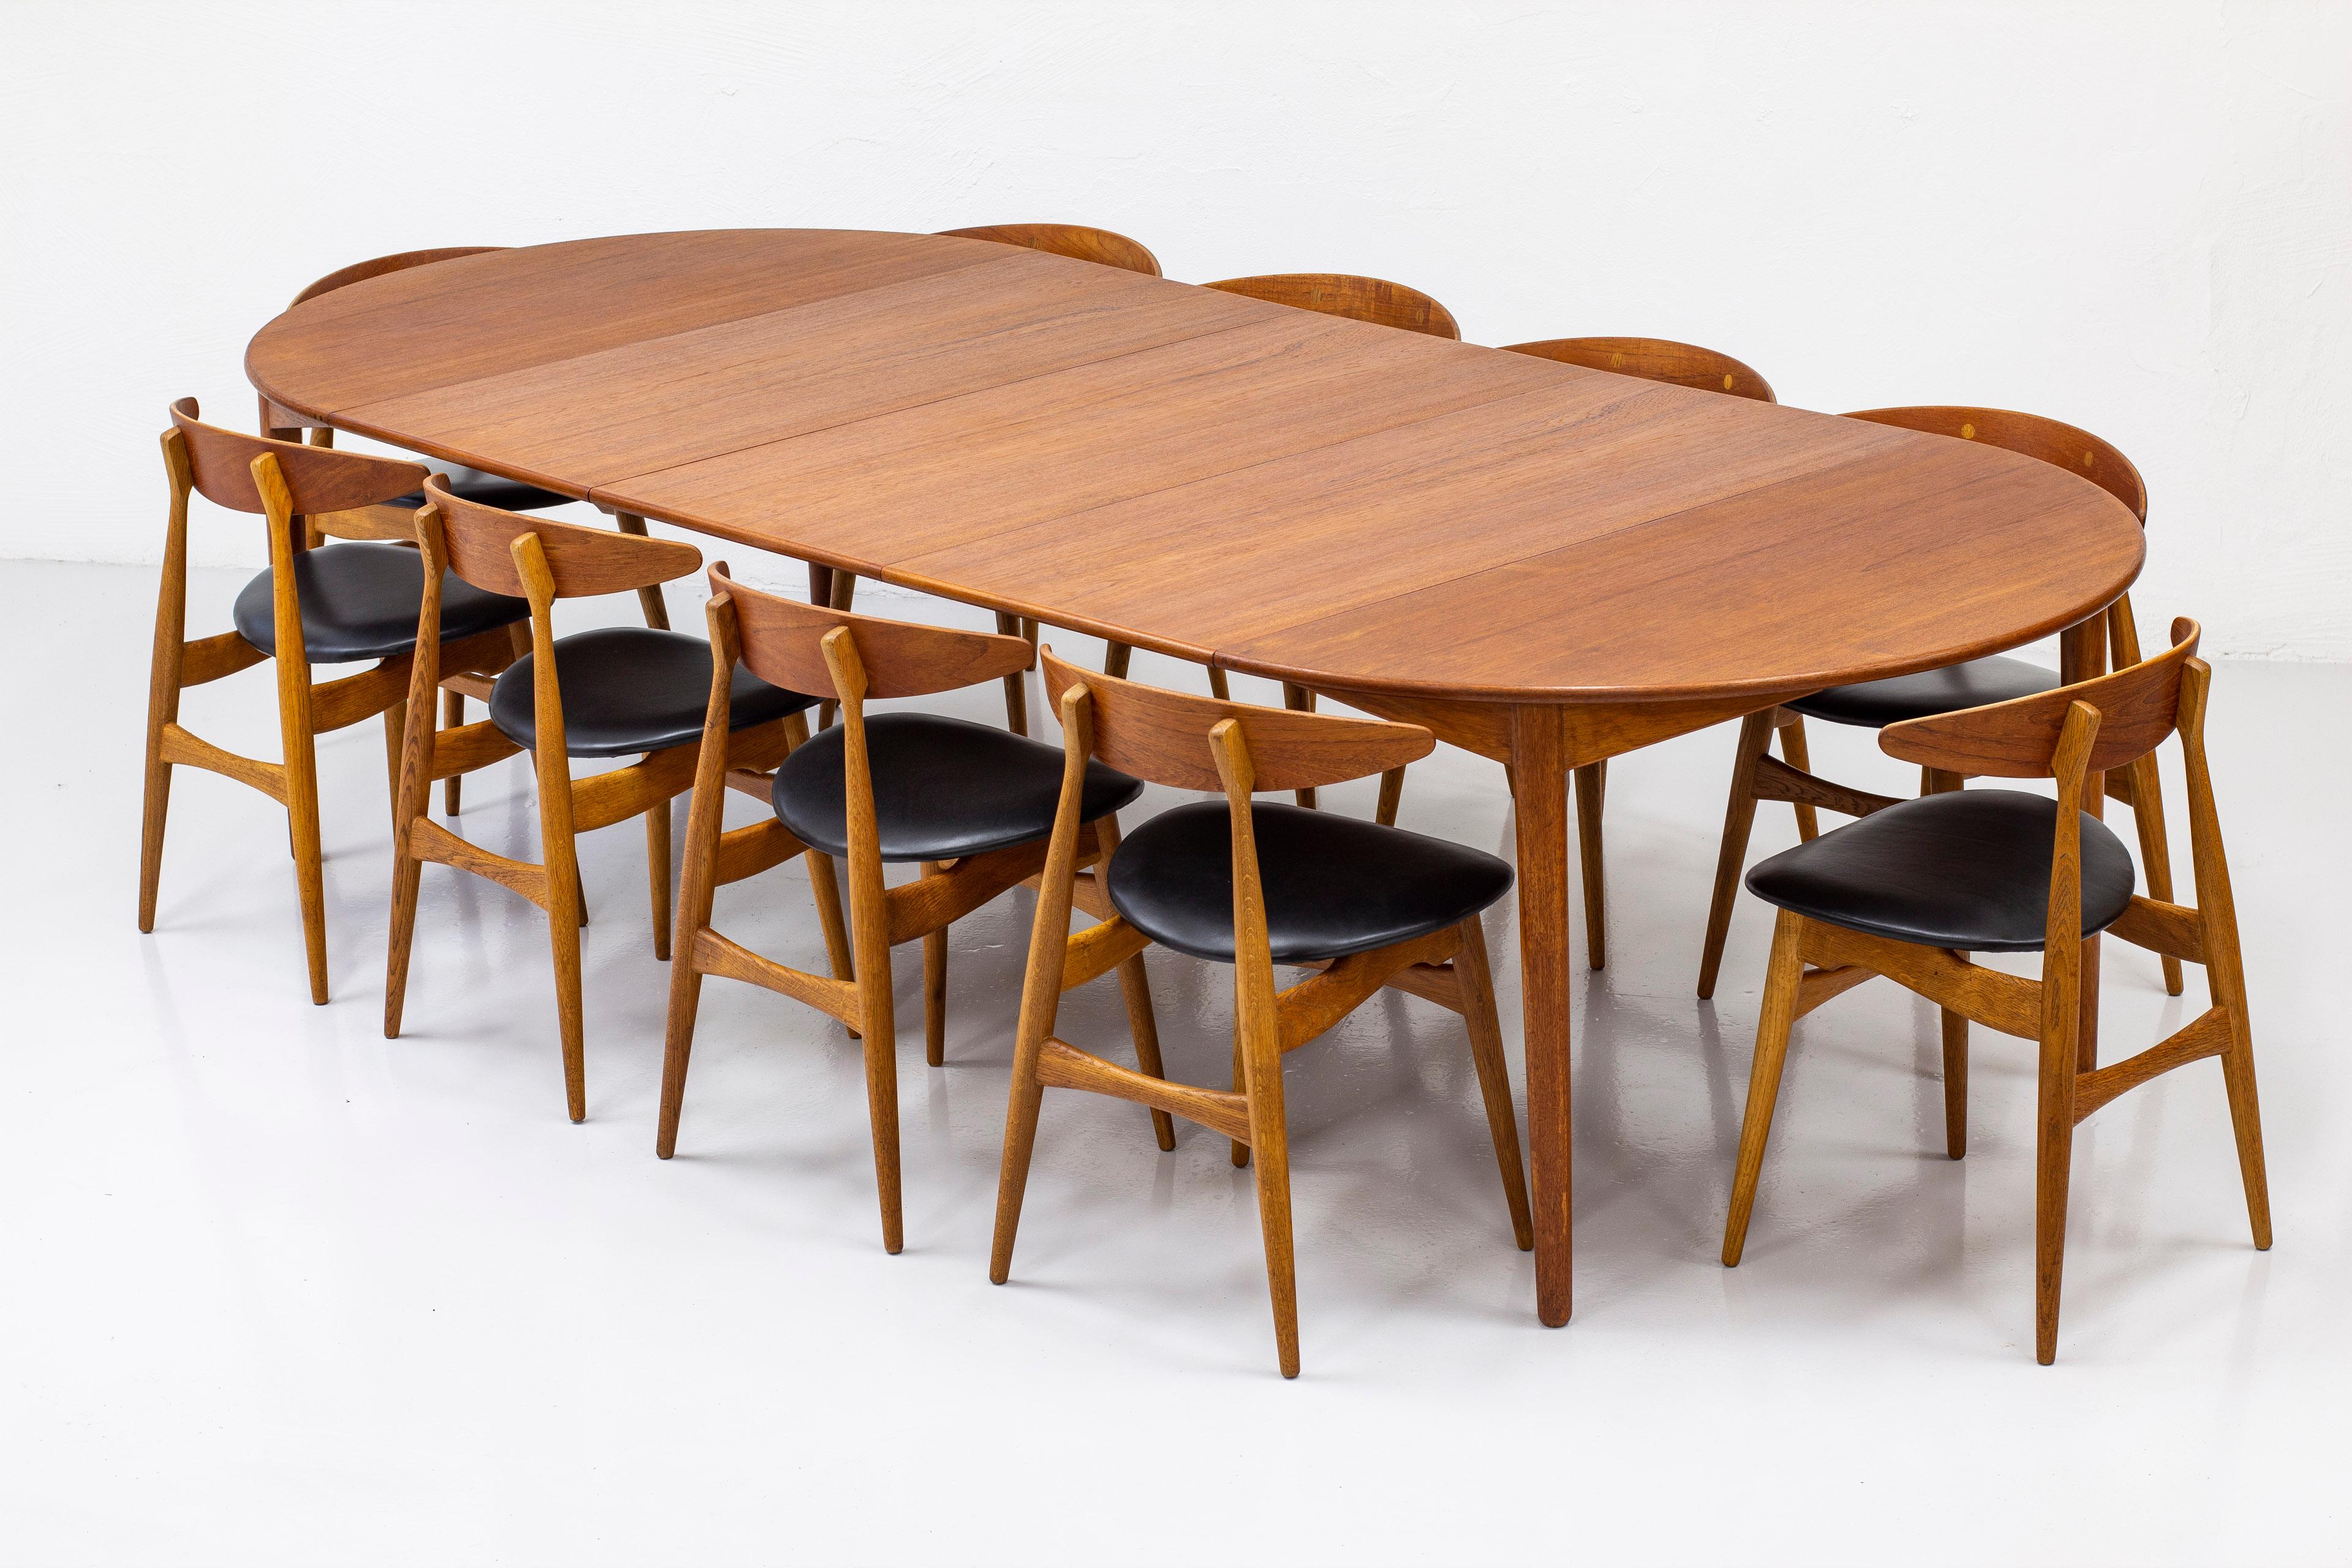 Large dining table made by Danish cabinetmaker Ludvig Pontoppidan in Copenhagen, Denmark during the 1950s. Made from teak wood. Tapered legs, rounded edge and nice dowel details on the edge of the table. With three inlays 'a 54.5 cm each making the